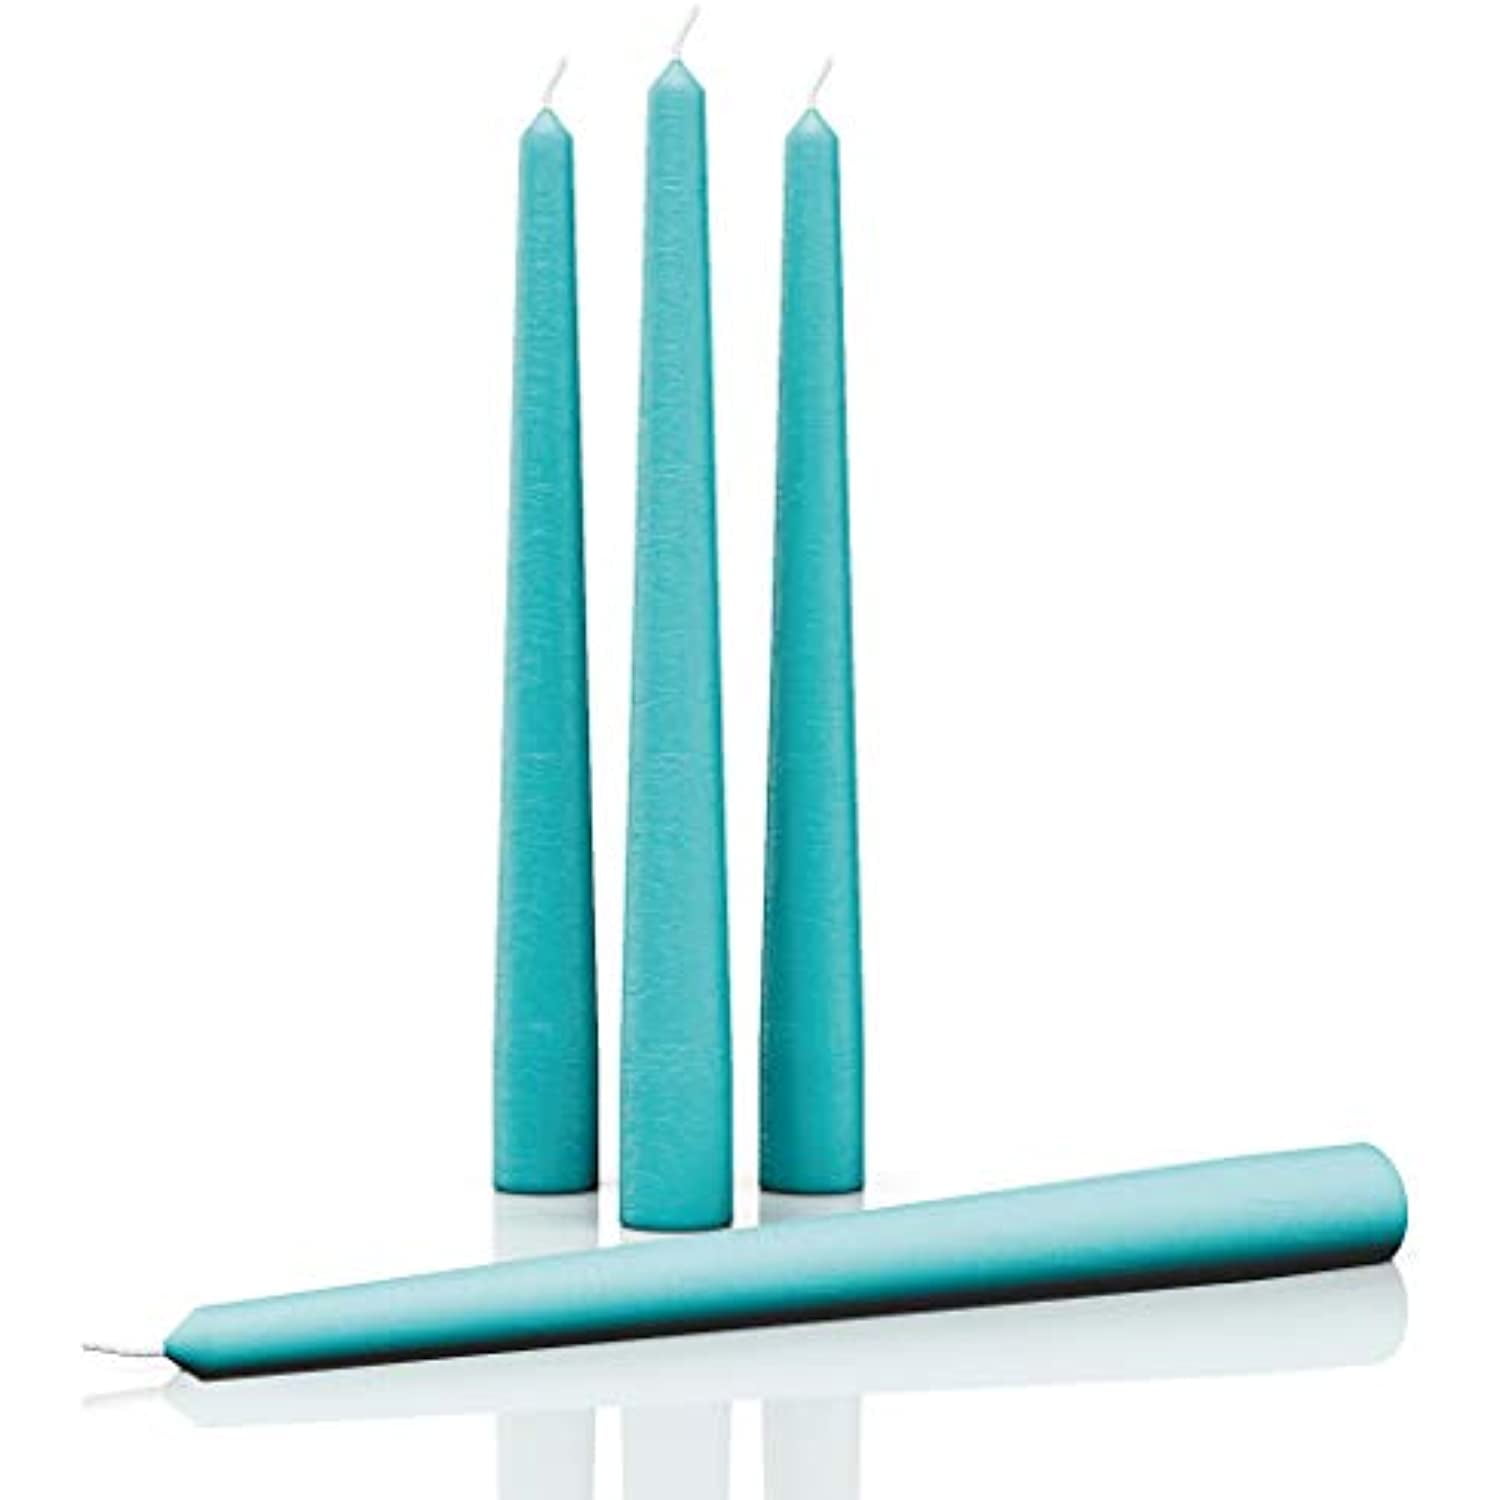 Slow Burning Tall Candles are Perfect As Dinner Taper Candles Dripless and Smokeless Candle Unscented CANDWAX 8 inch Taper Candles Set of 4 Ivory Candlesticks 